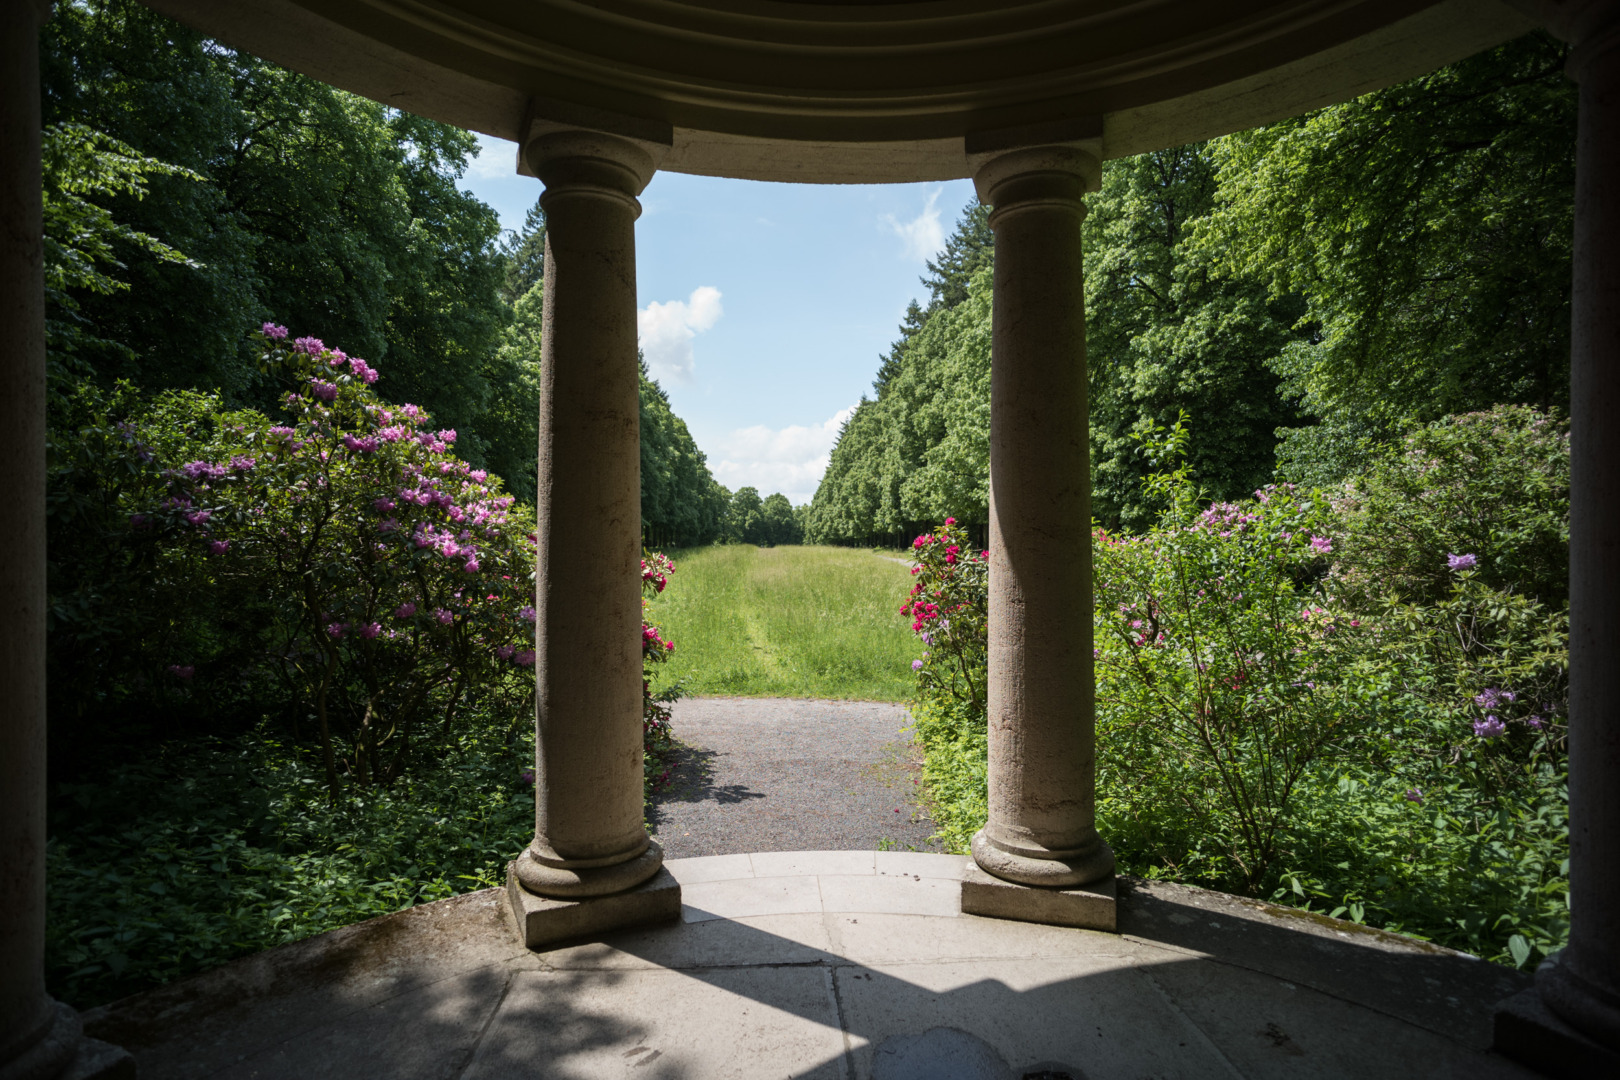 Makes space wide: 100 degrees angle of view create a special look for sure. Park of Schwanberg Castle, Bavaria. Distagon 18/4 on Leica M10. 1/750 sec, f/4, ISO 200.